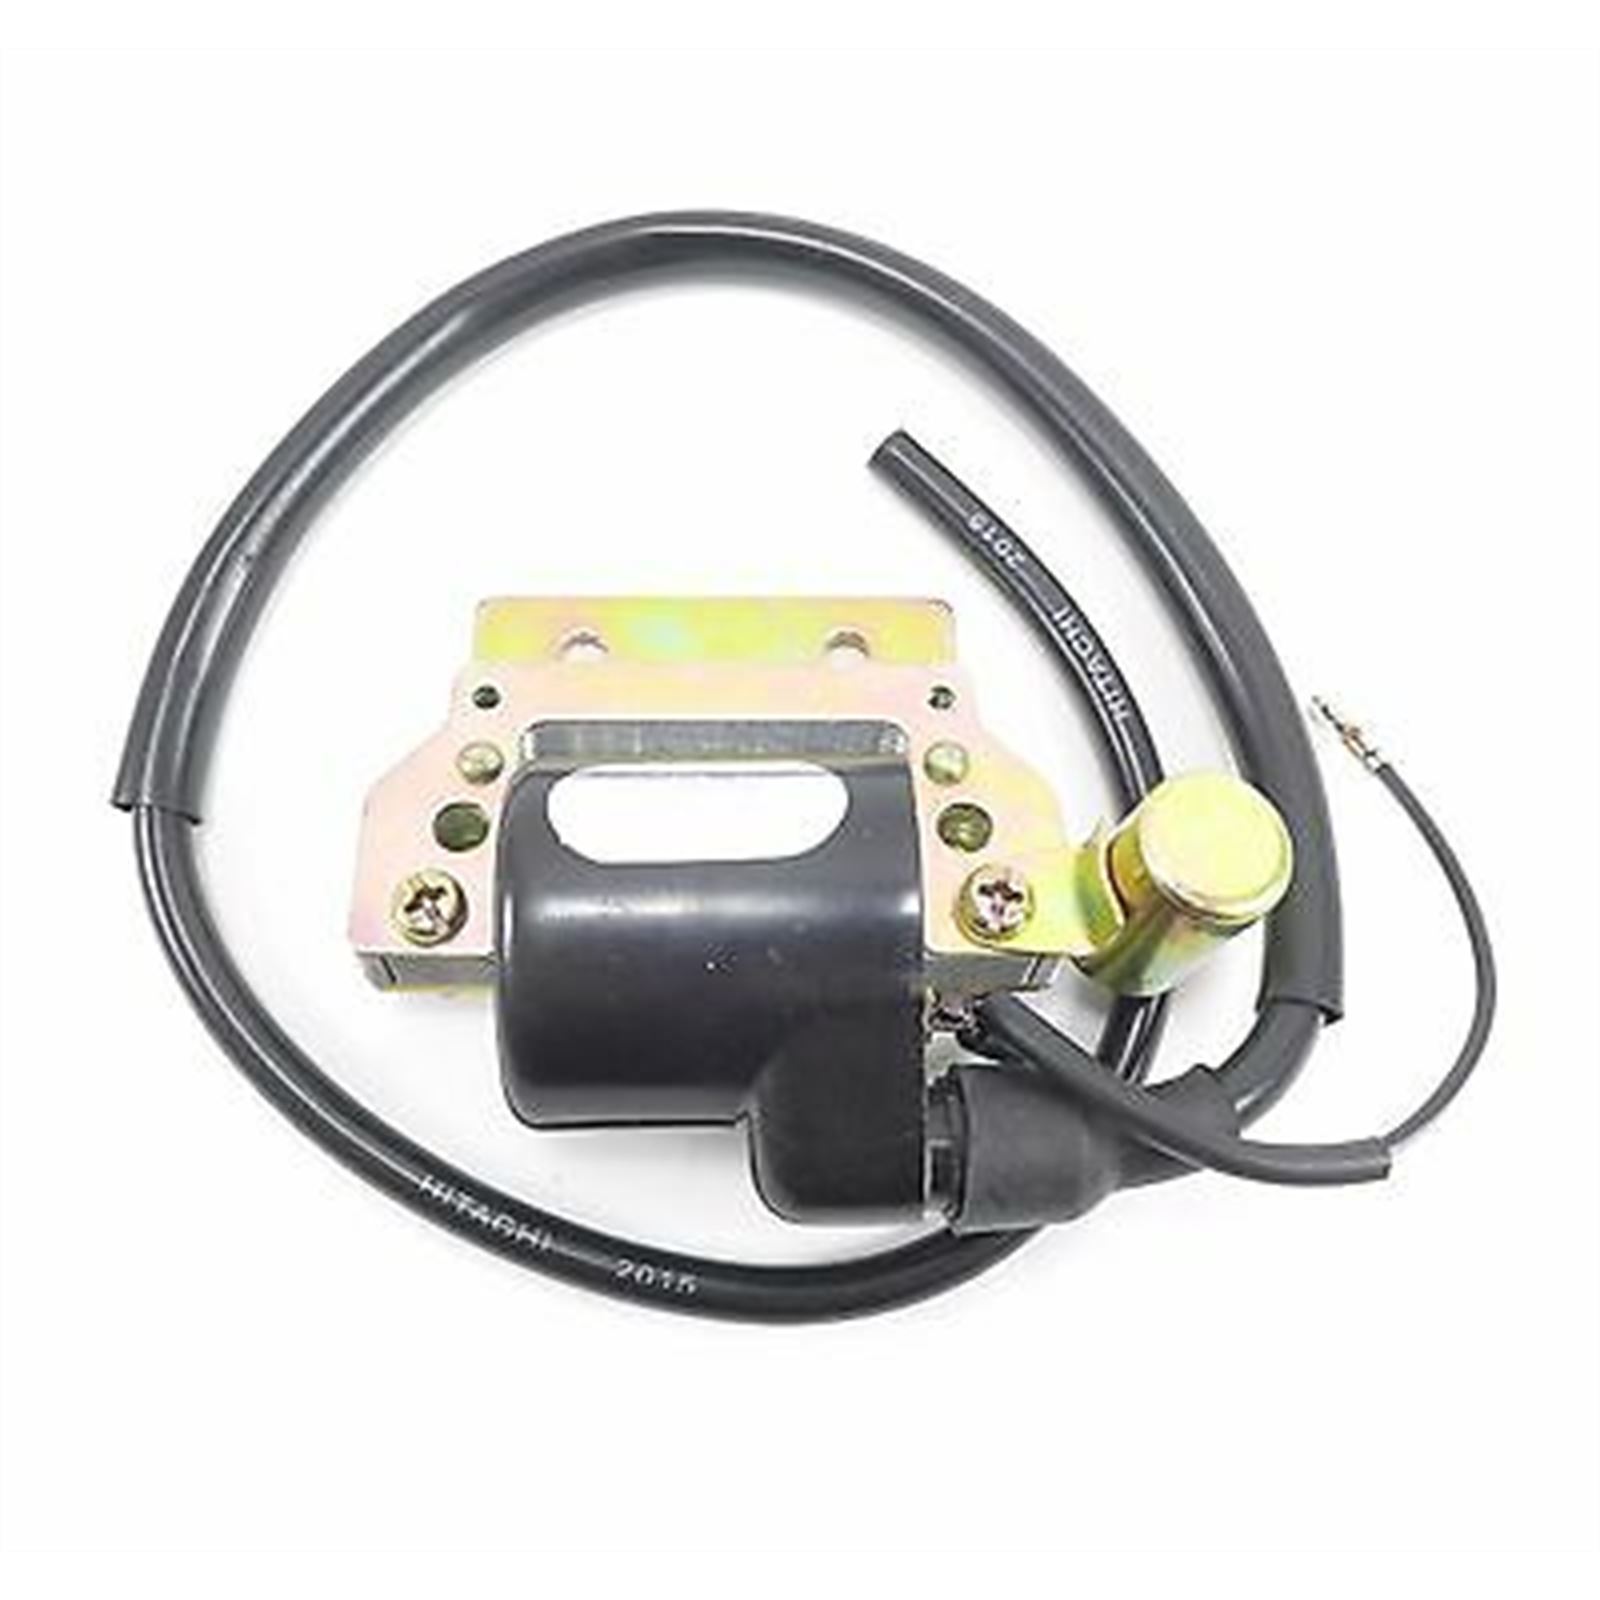 2FastMoto 6 Volt Ignition Coil with Condenser for Honda CB, CT, MR, SL, XR,  XL